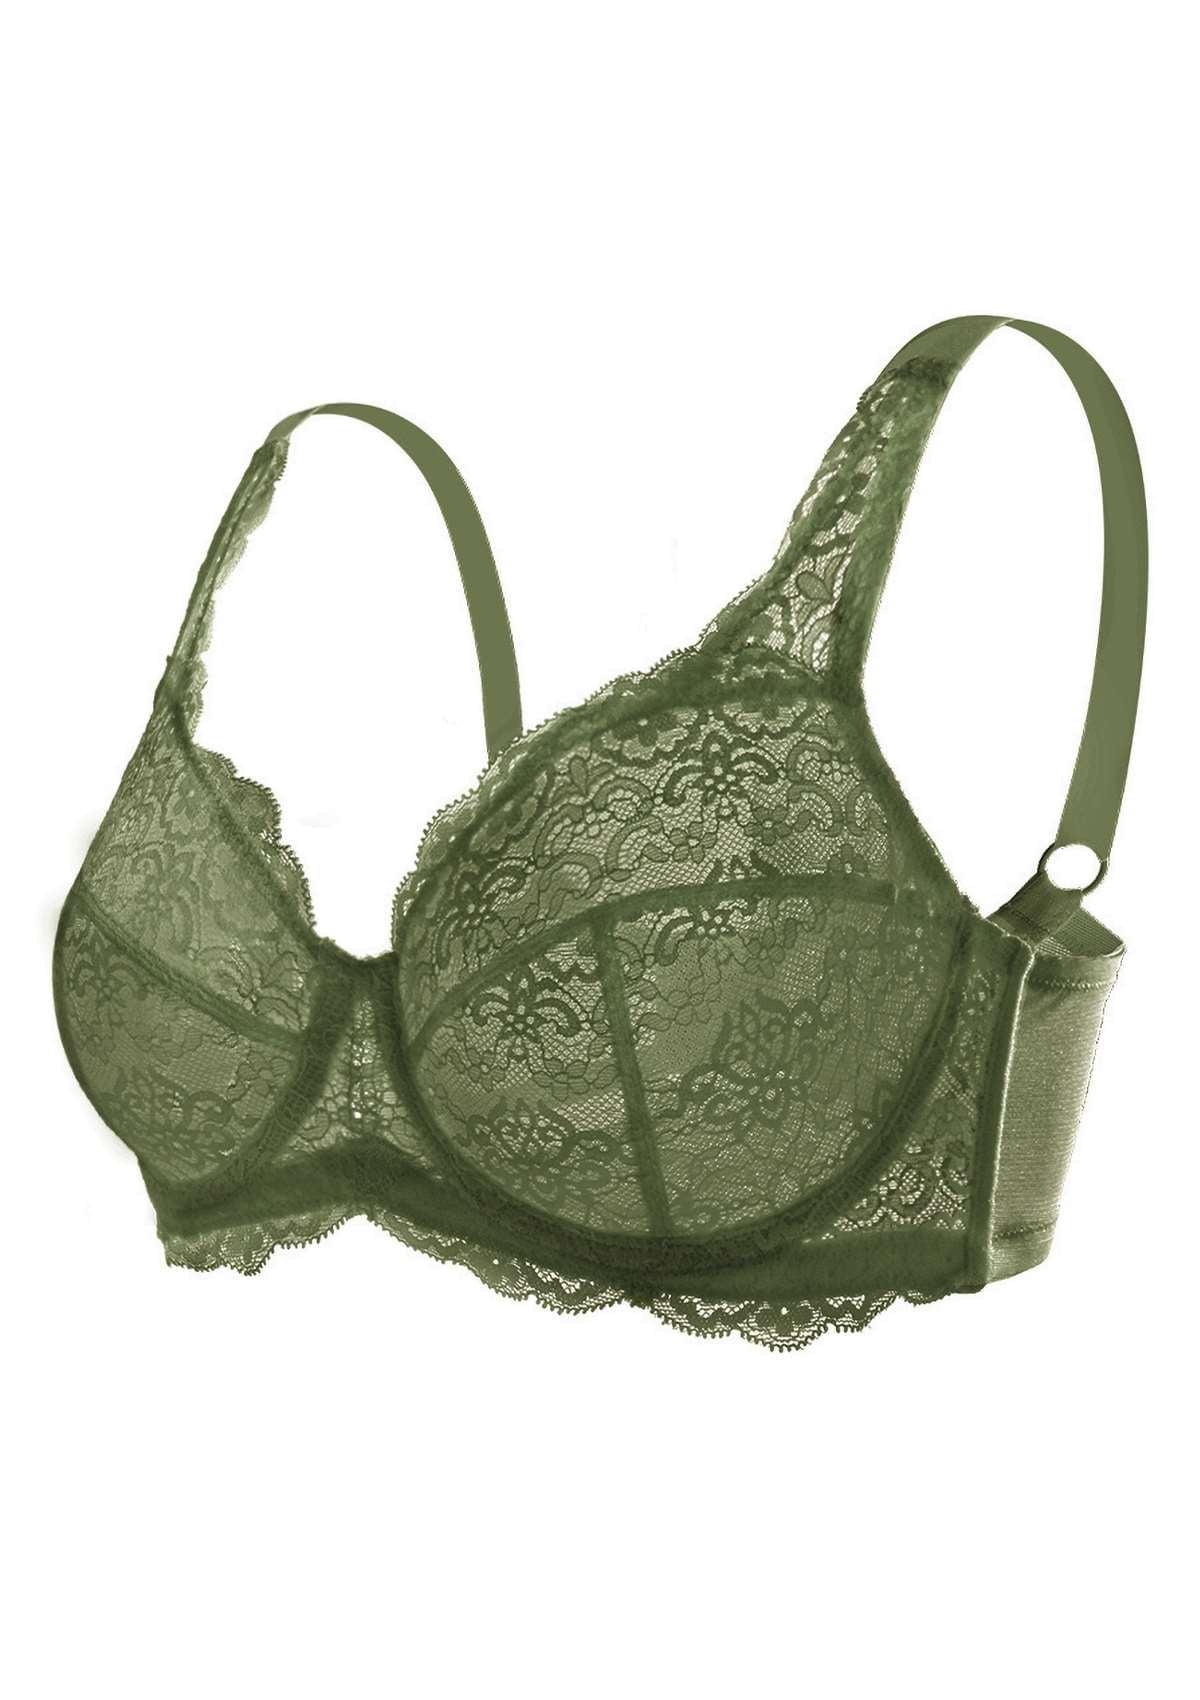 HSIA All-Over Floral Lace Unlined Bra: Minimizer Bra For Heavy Breasts - Dark Green / 42 / D